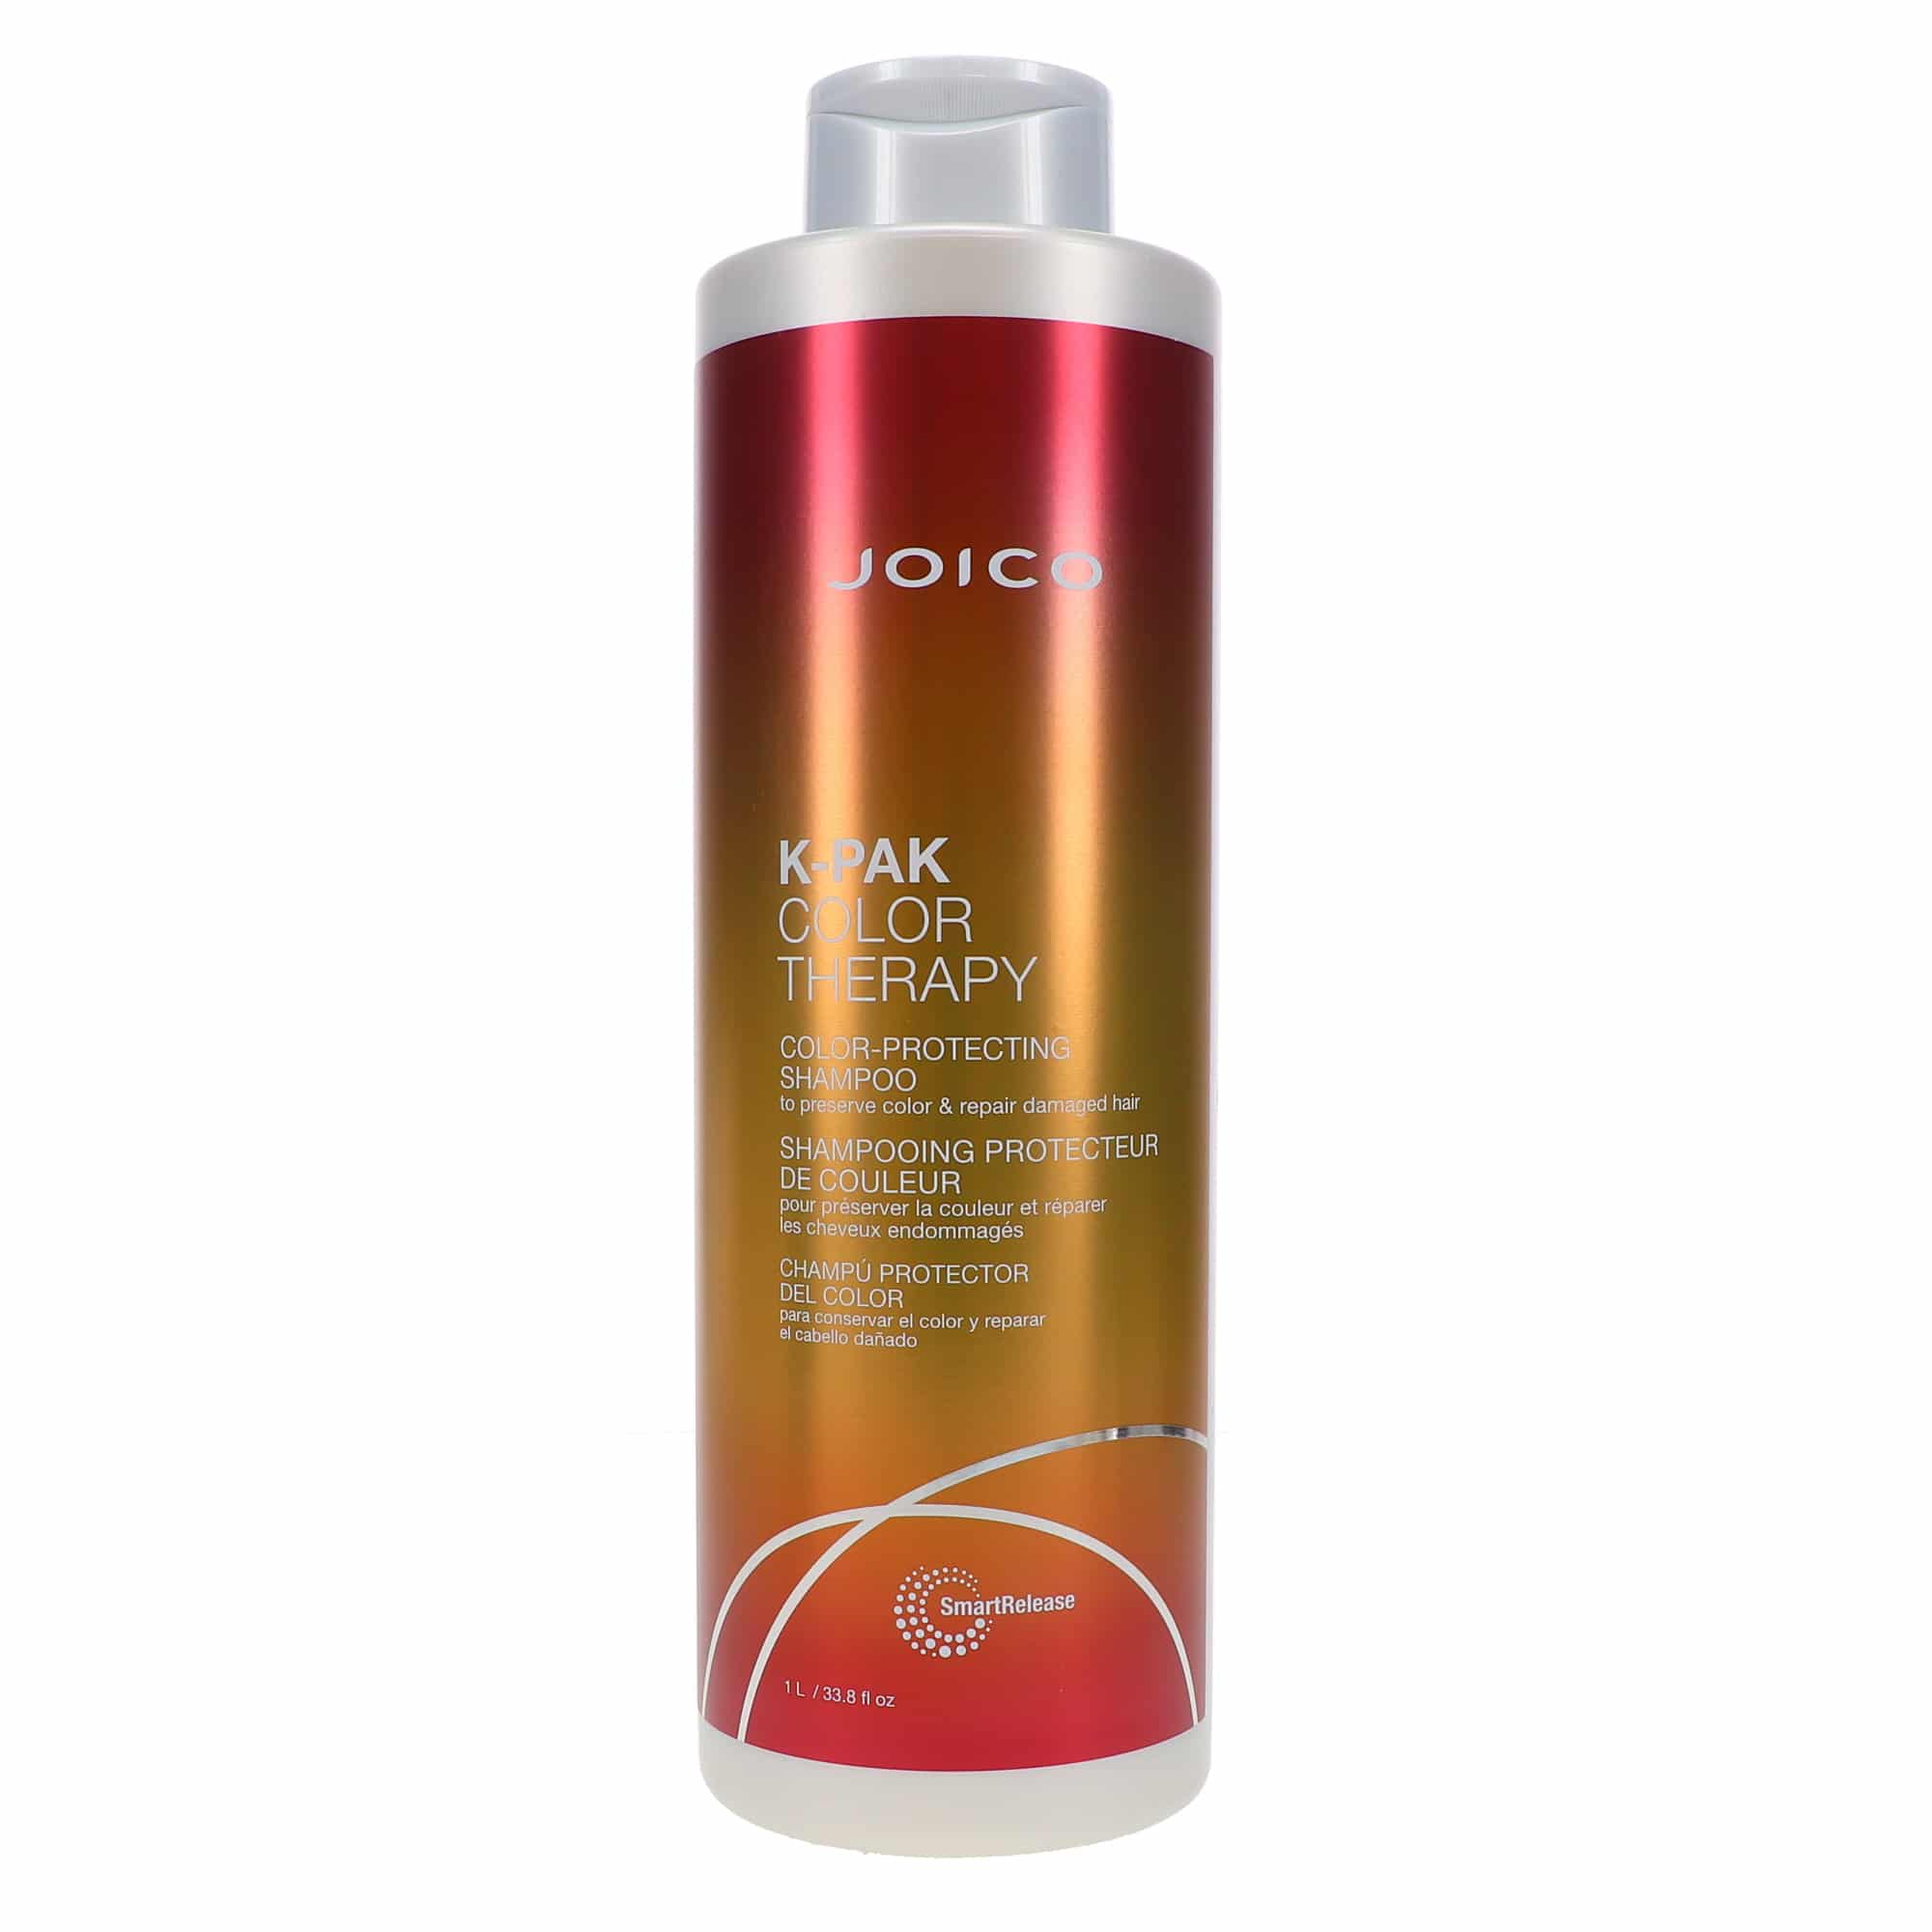 Joico Color Therapy Shampoo 33.8